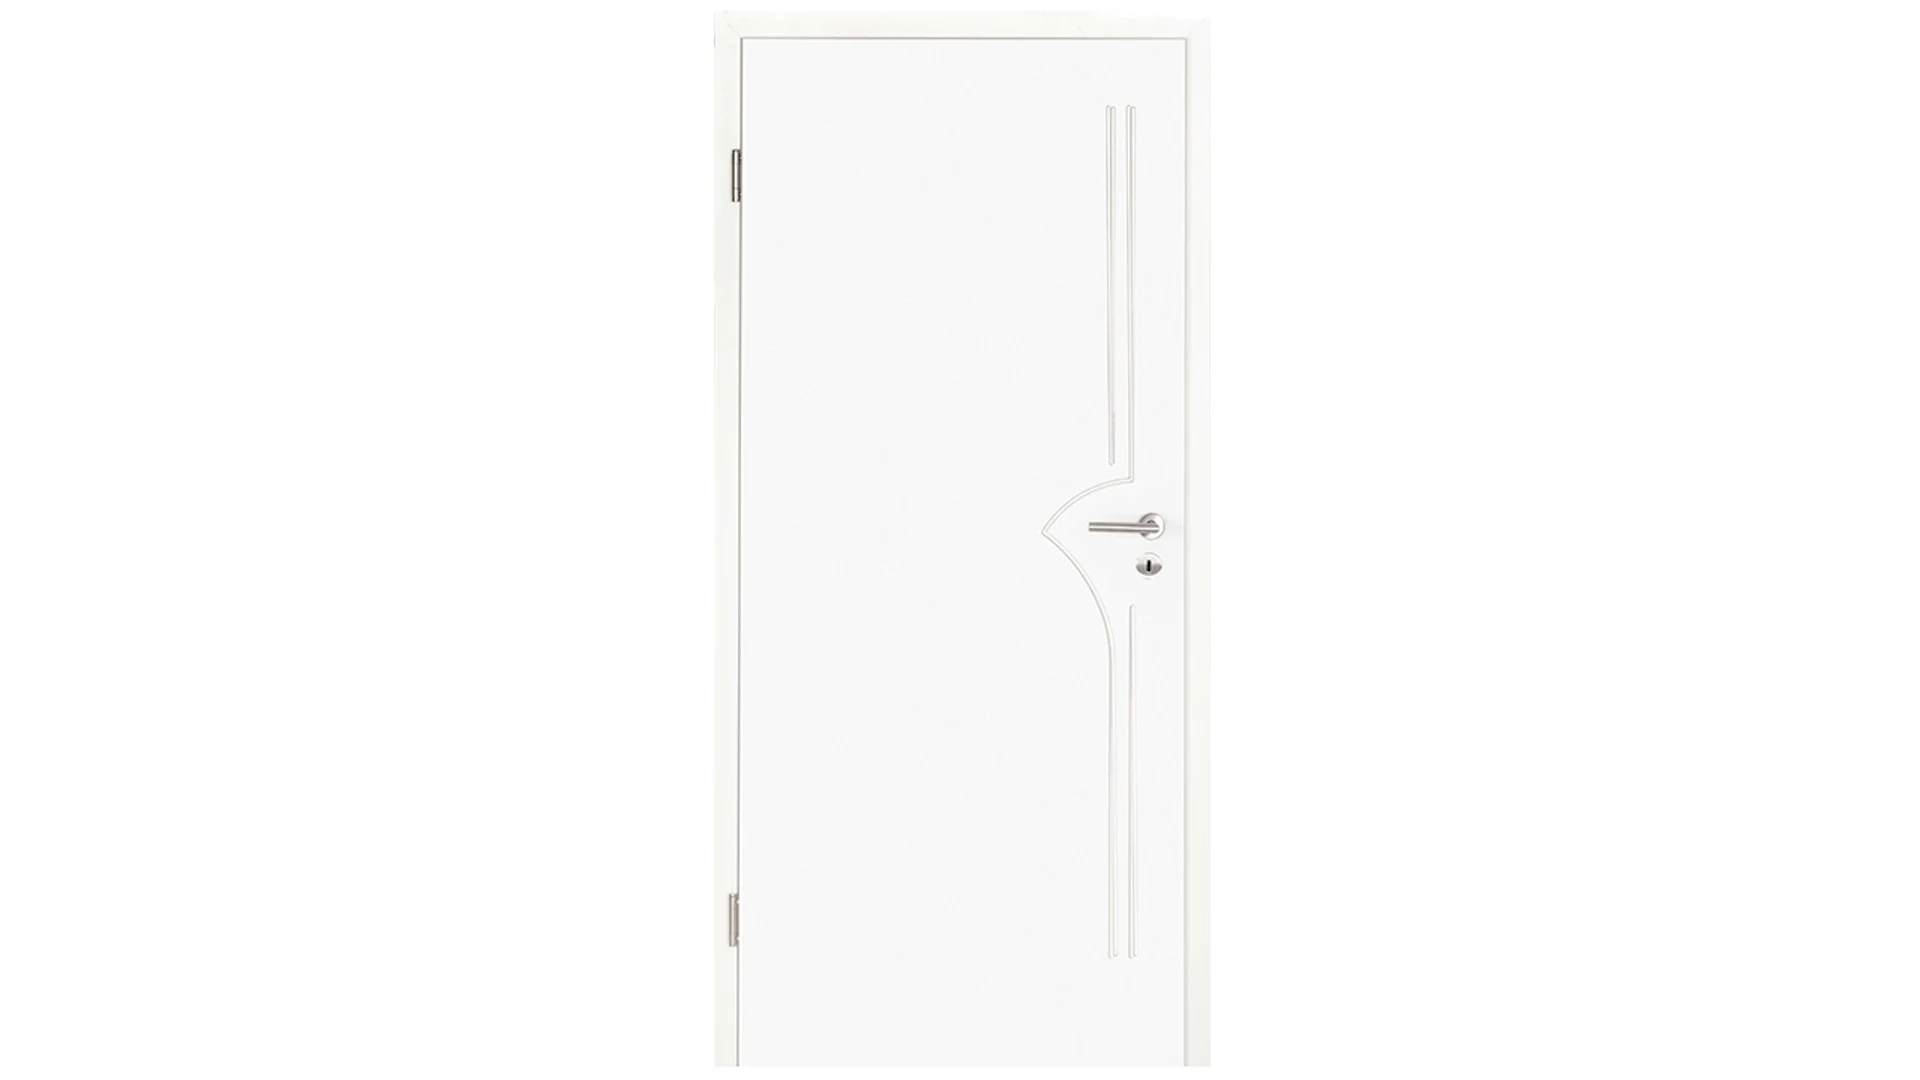 planeo interior door lacquer 2.0 - Kalle 9016 white lacquer 2110 x 985 mm DIN L - round RSP hinge 3-t